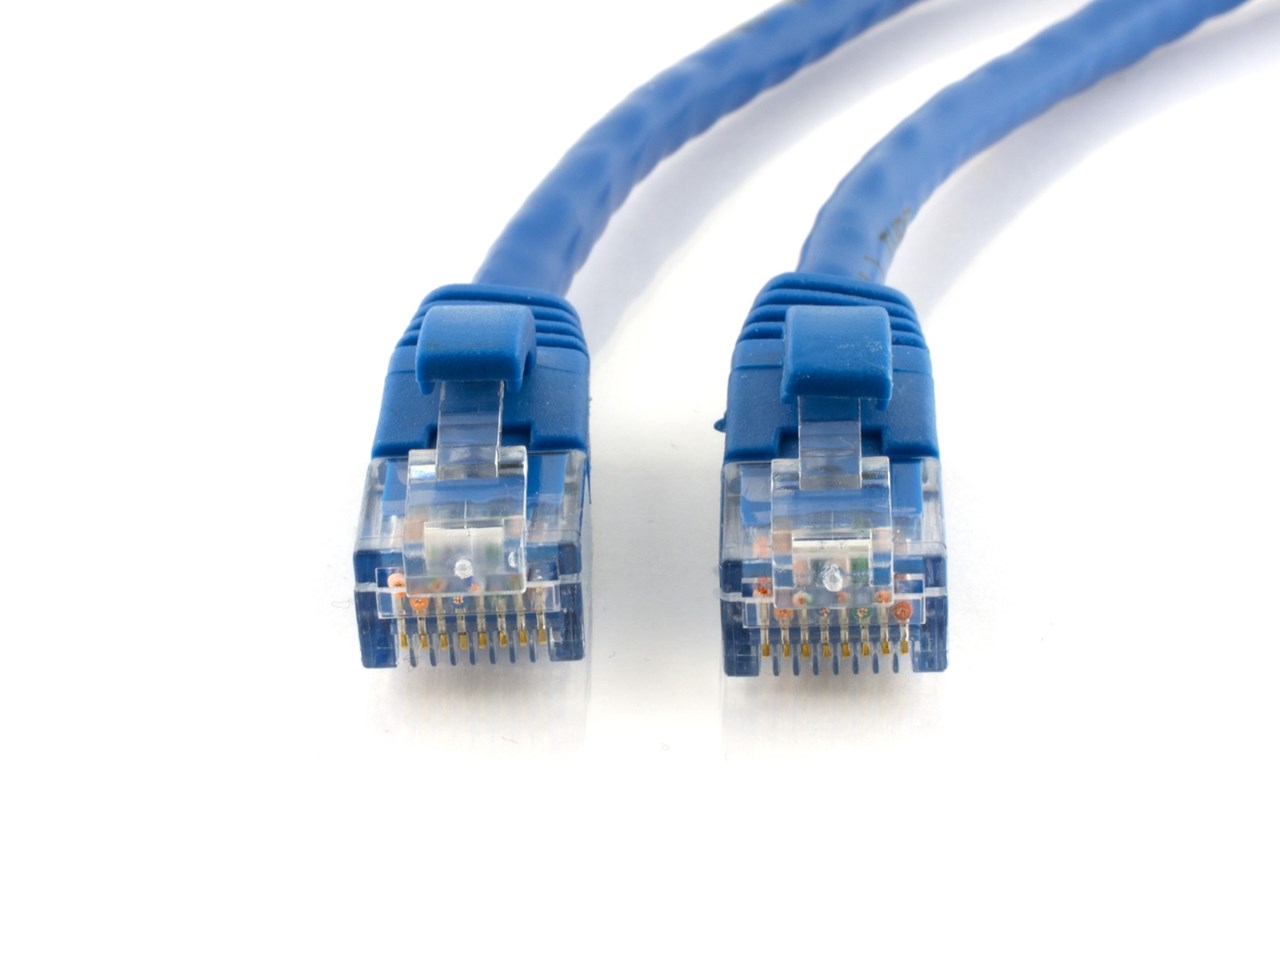 Bootless Cat6 Ethernet Patch Cable CNE479298 Orange 14 Feet 2 Pack 